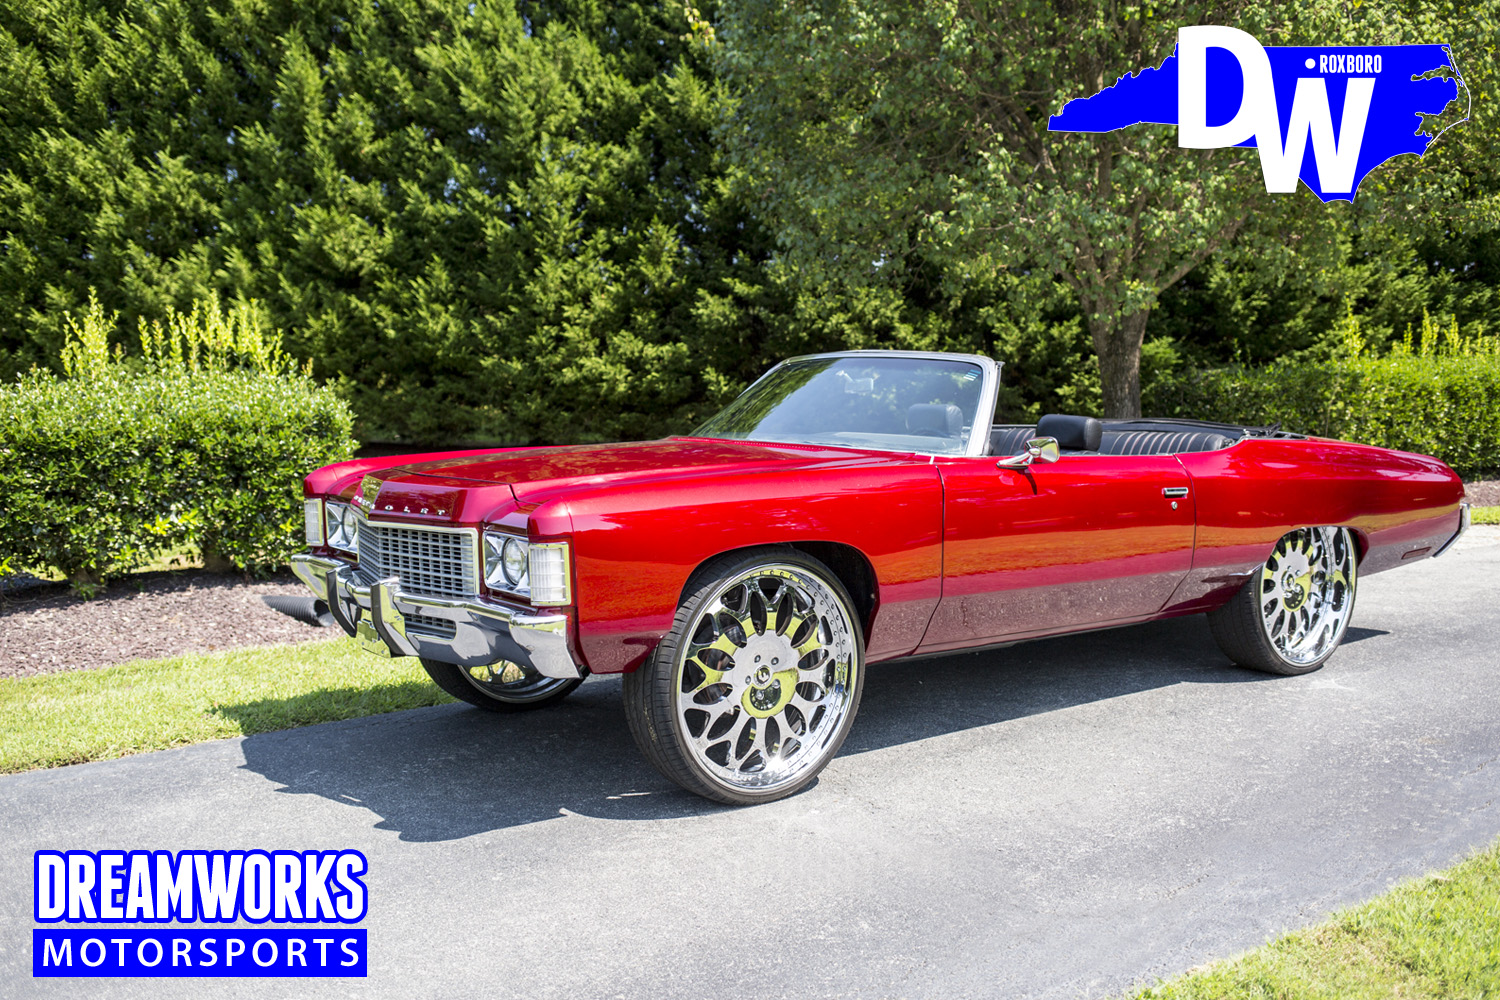 Donk-on-Forgiatos-With-JL-Audio-System-by-Dreamworksmotorsports-5.jpg